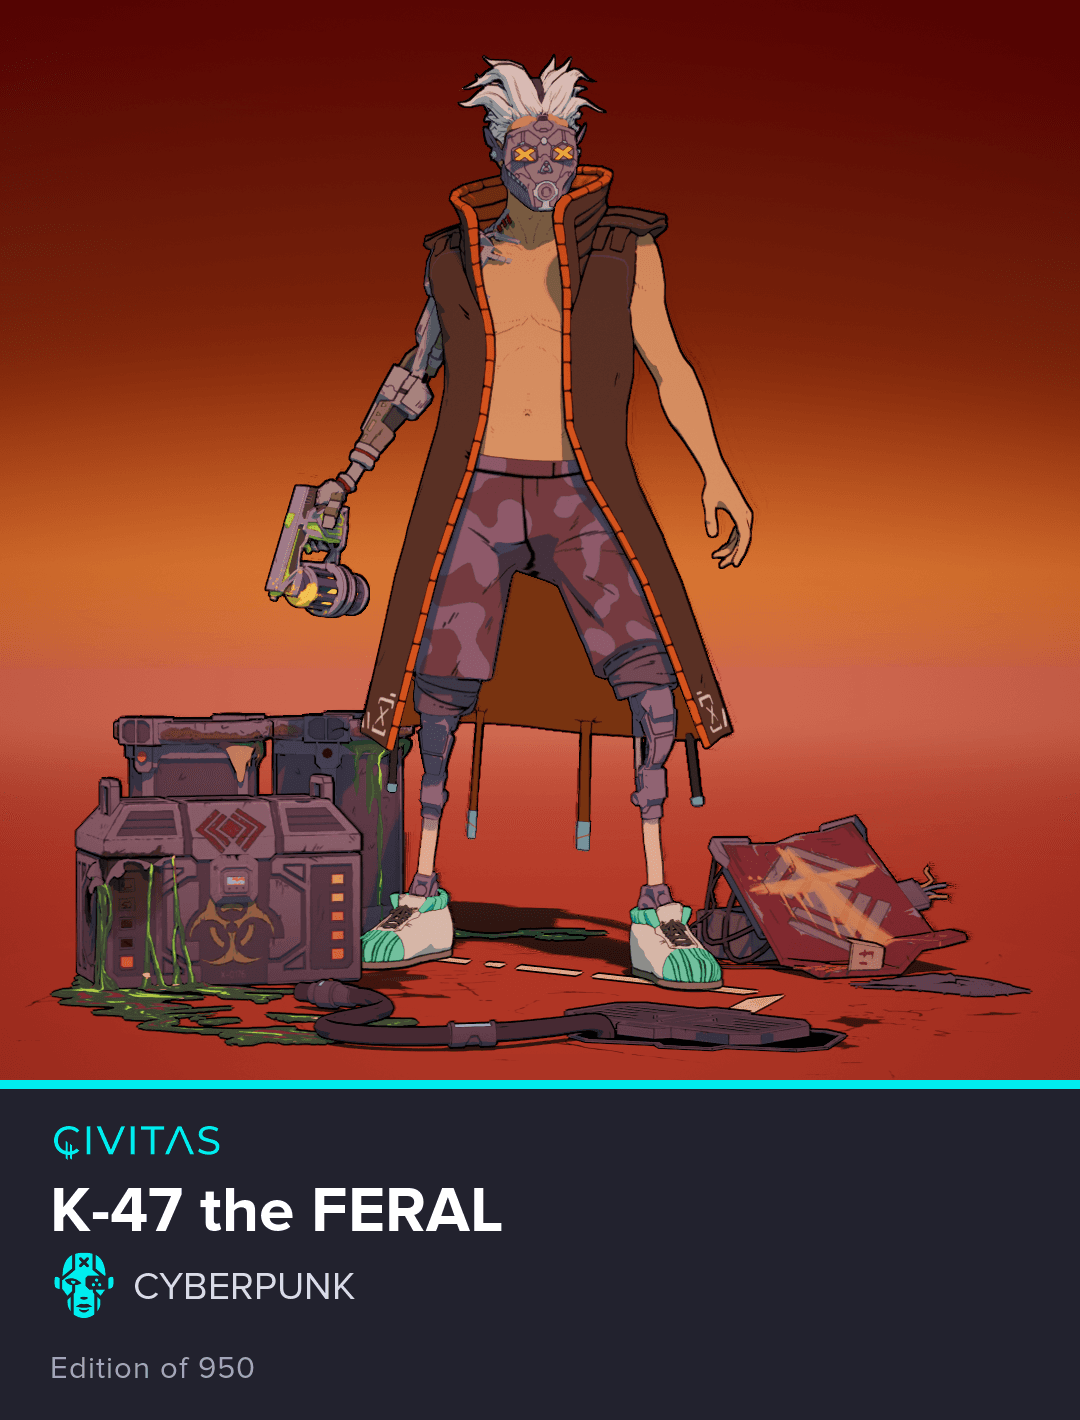 K-47 the Feral #249